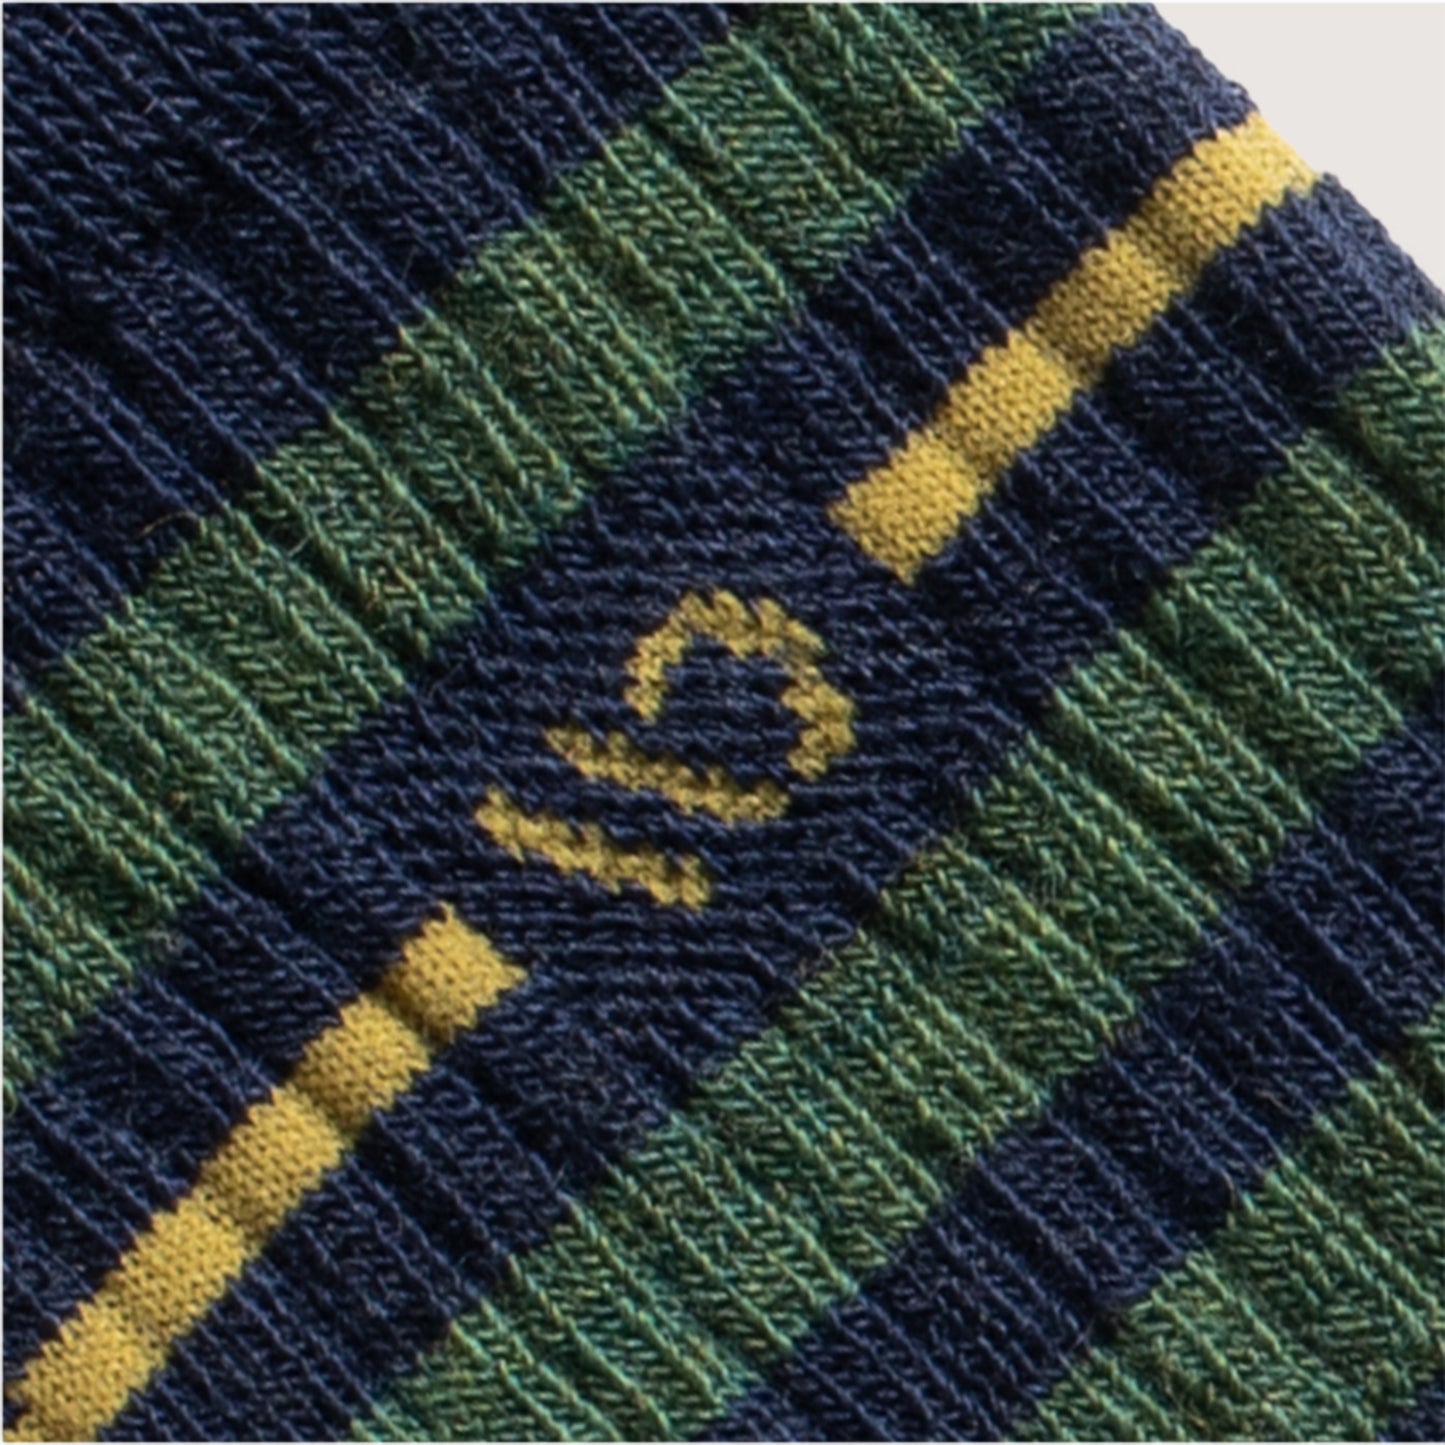 Detail featuring a yellow logo and stripe, with wider denim and green stripes --Denim